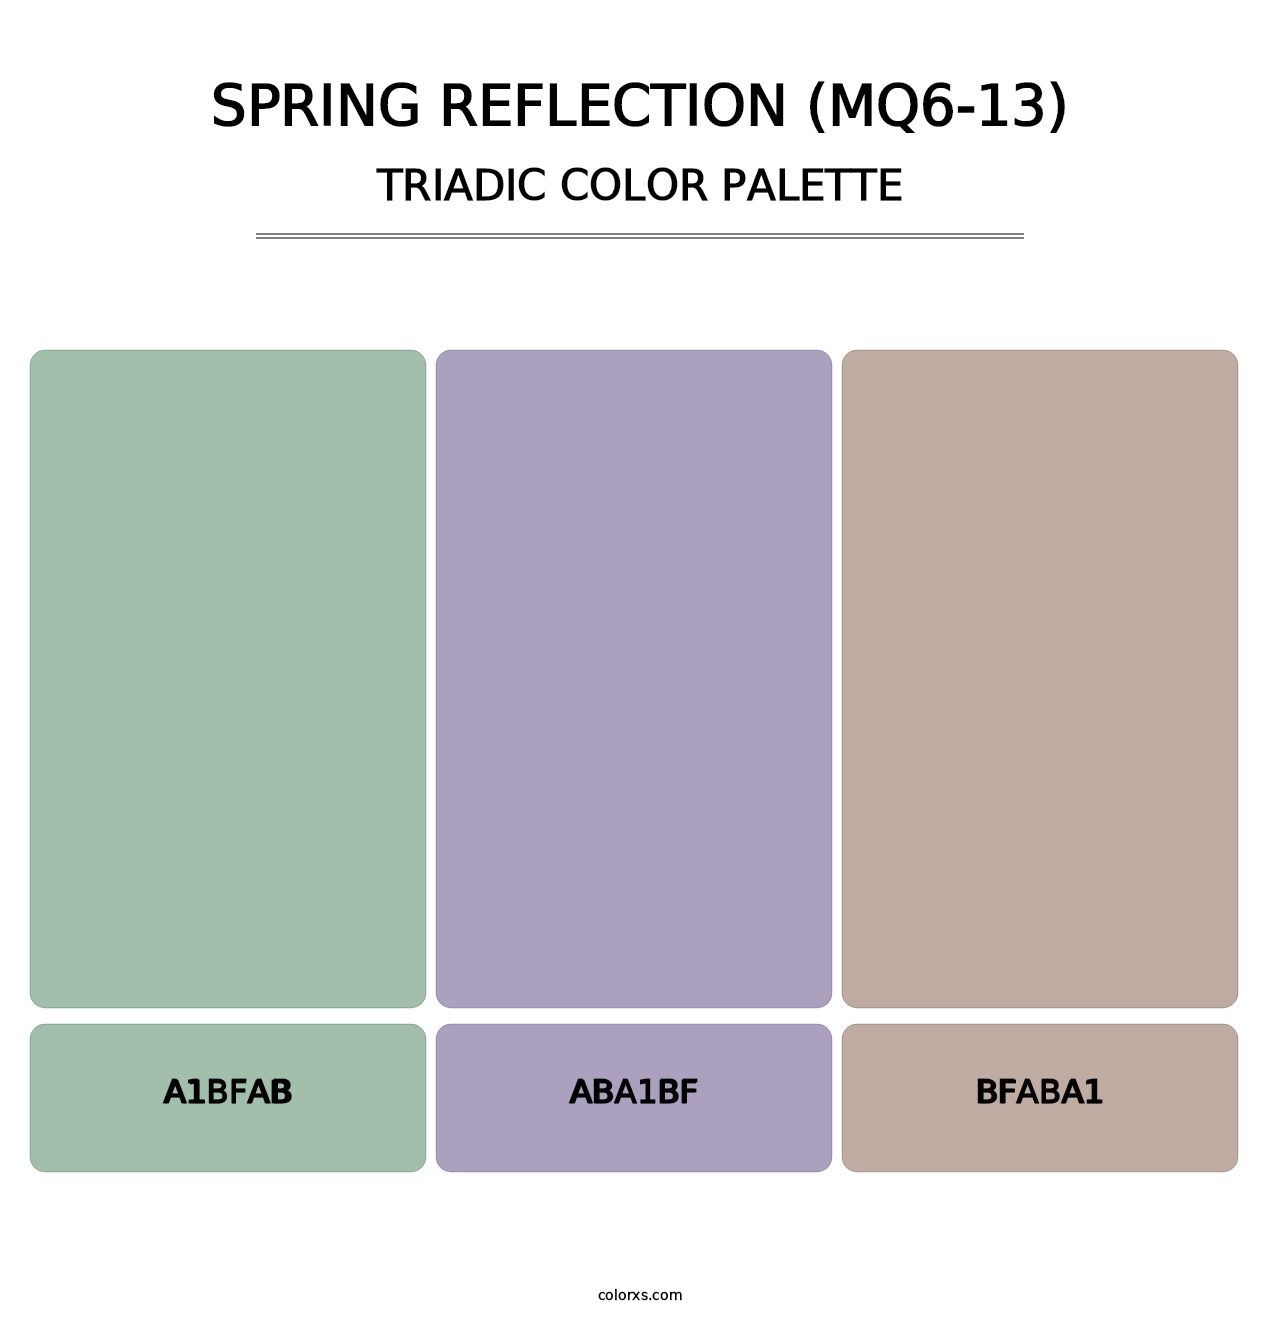 Spring Reflection (MQ6-13) - Triadic Color Palette